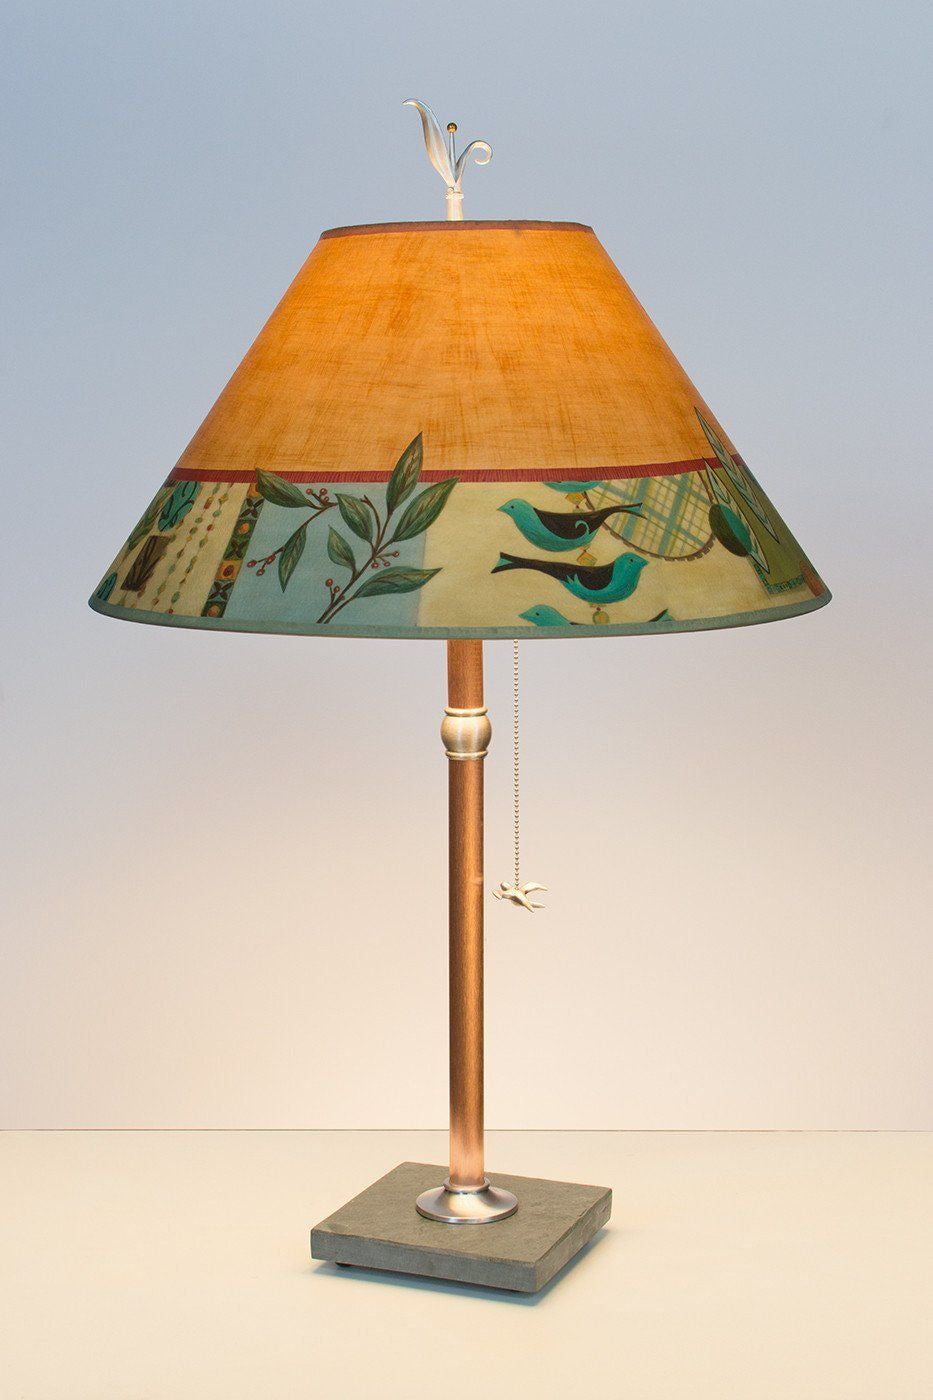 Janna Ugone & Co Table Lamps Copper Table Lamp with Large Conical Shade in New Capri Spice